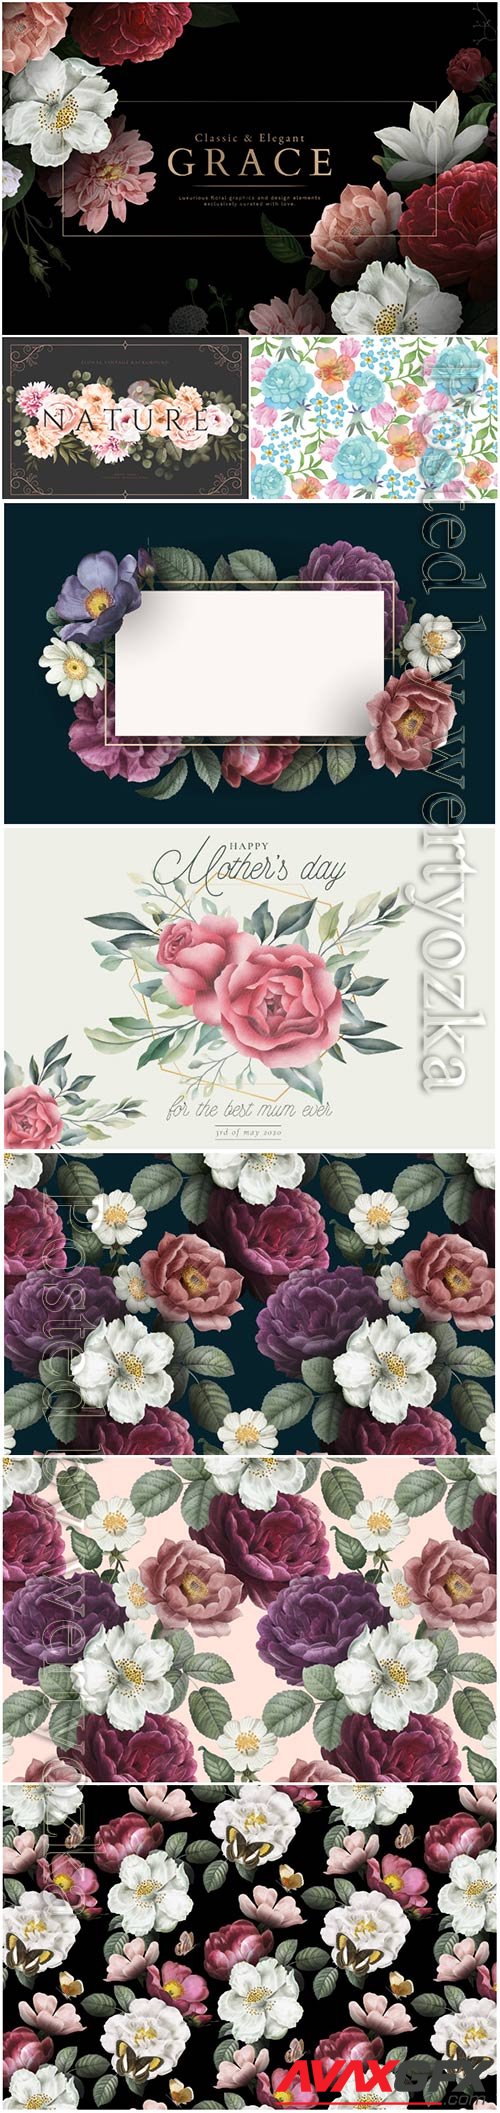 Beautiful vector backgrounds with roses and flowers